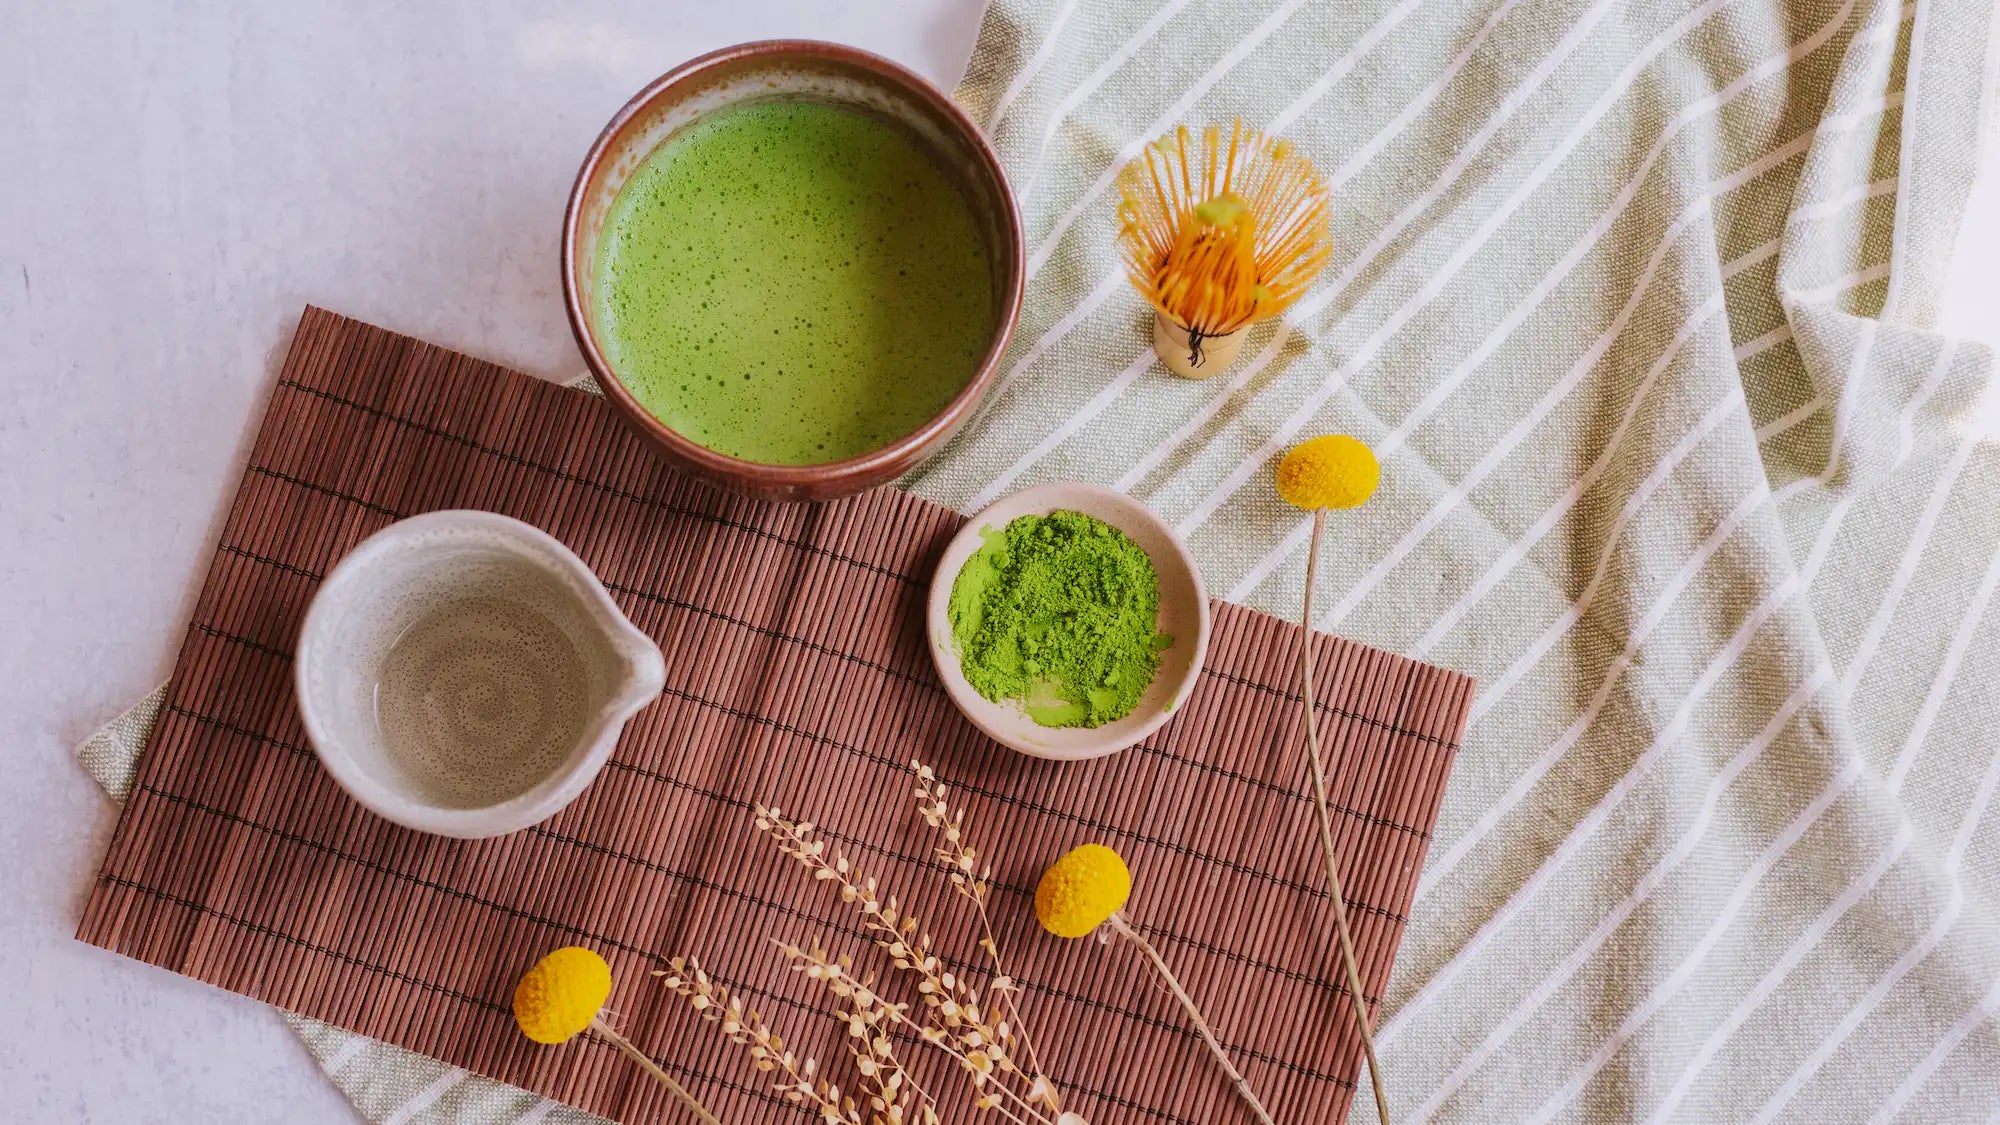 traditional matcha service with bowl, whisk, and vibrant green matcha powder